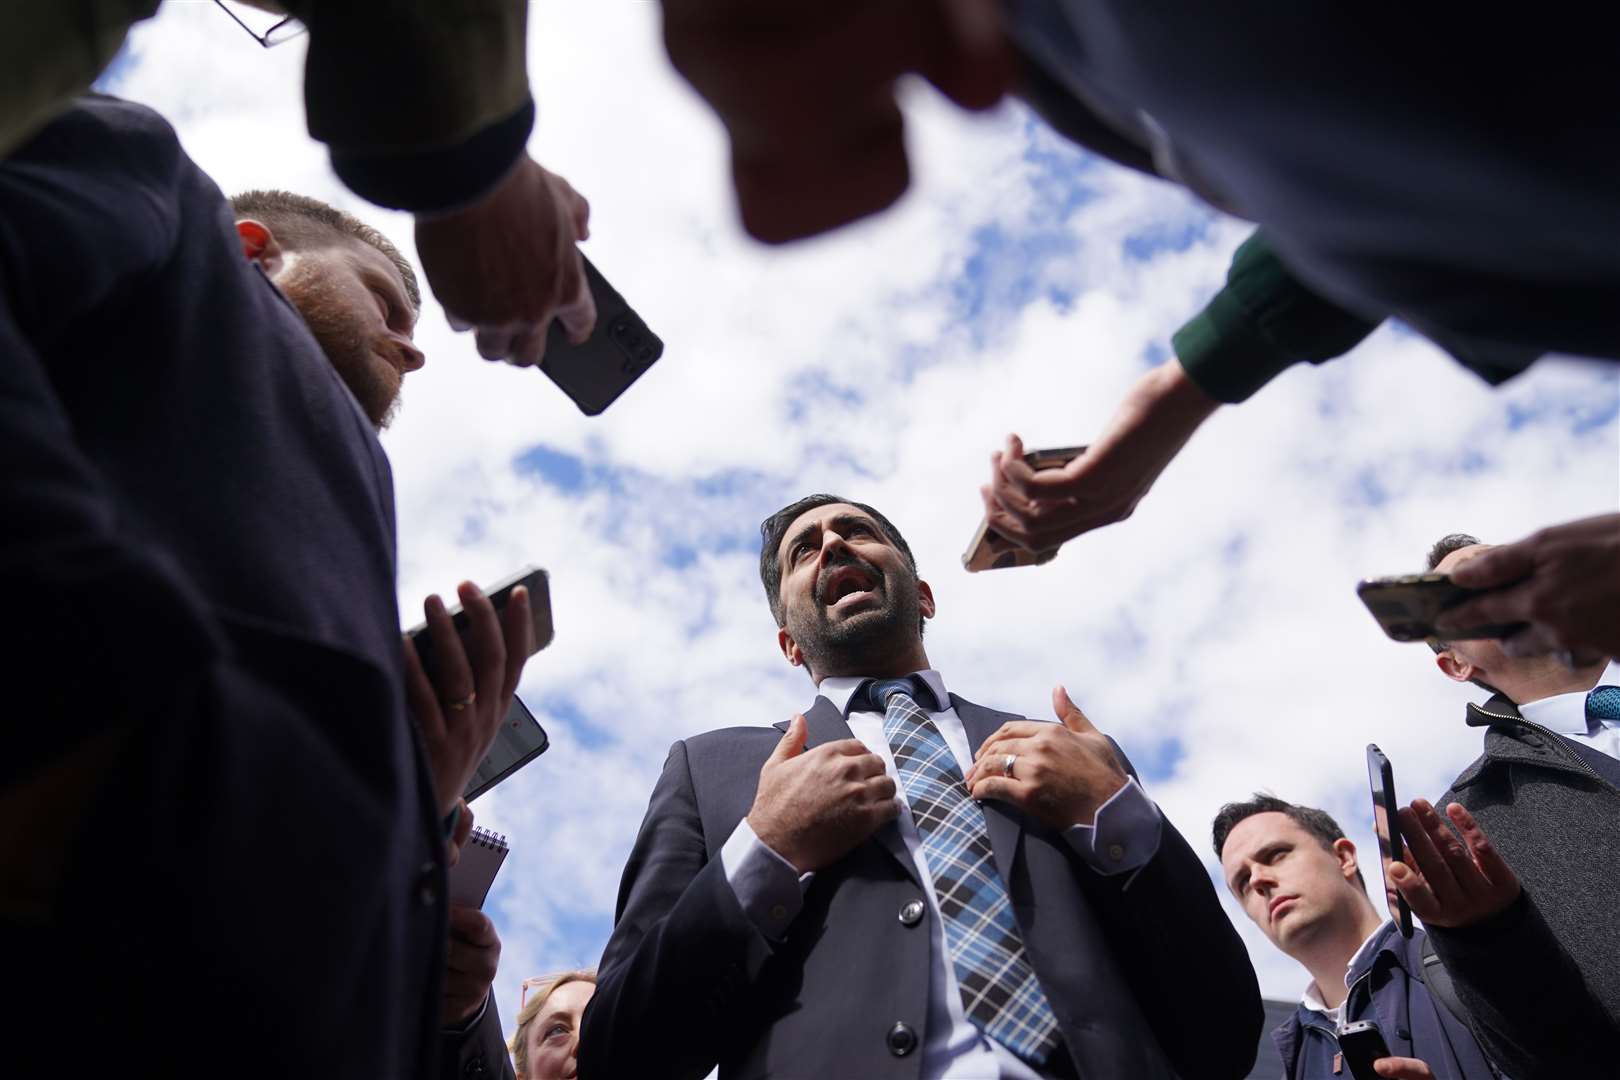 Humza Yousaf said he has no plans to quit, as he fights for his political future (Andrew Milligan/PA)